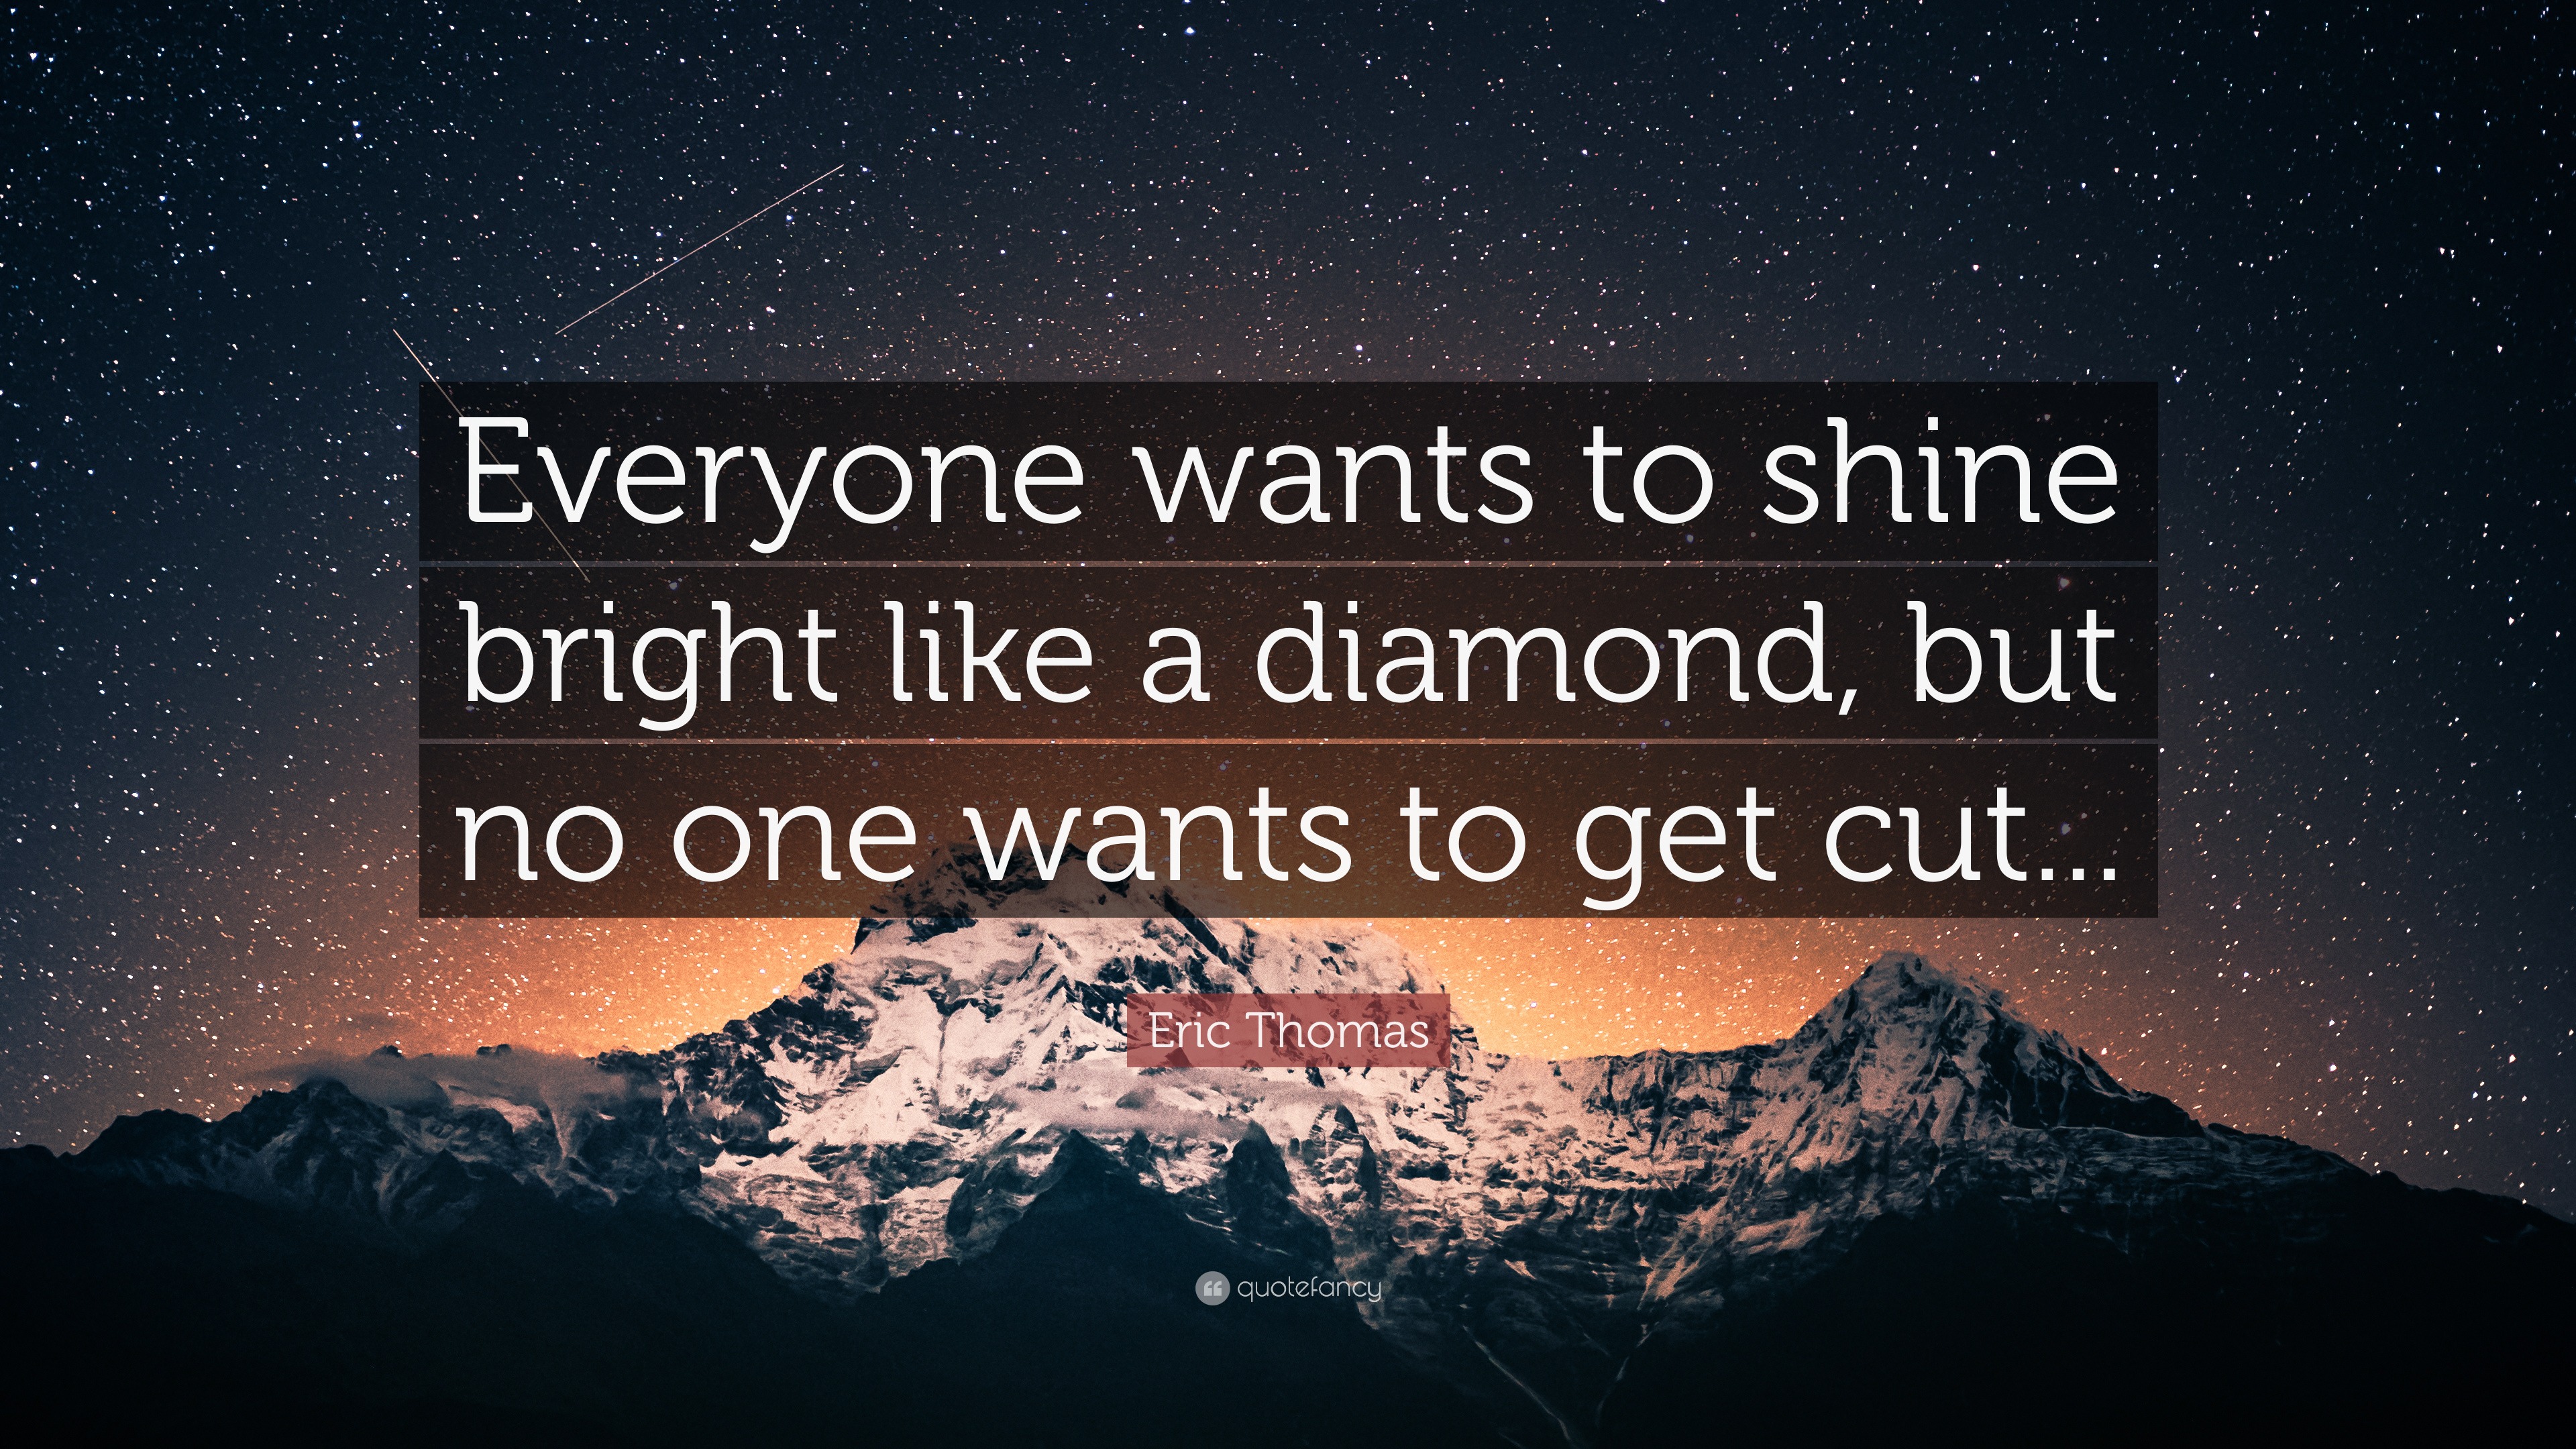 Eric Thomas Quote: “Everyone wants to shine bright like a diamond, but no  one wants to